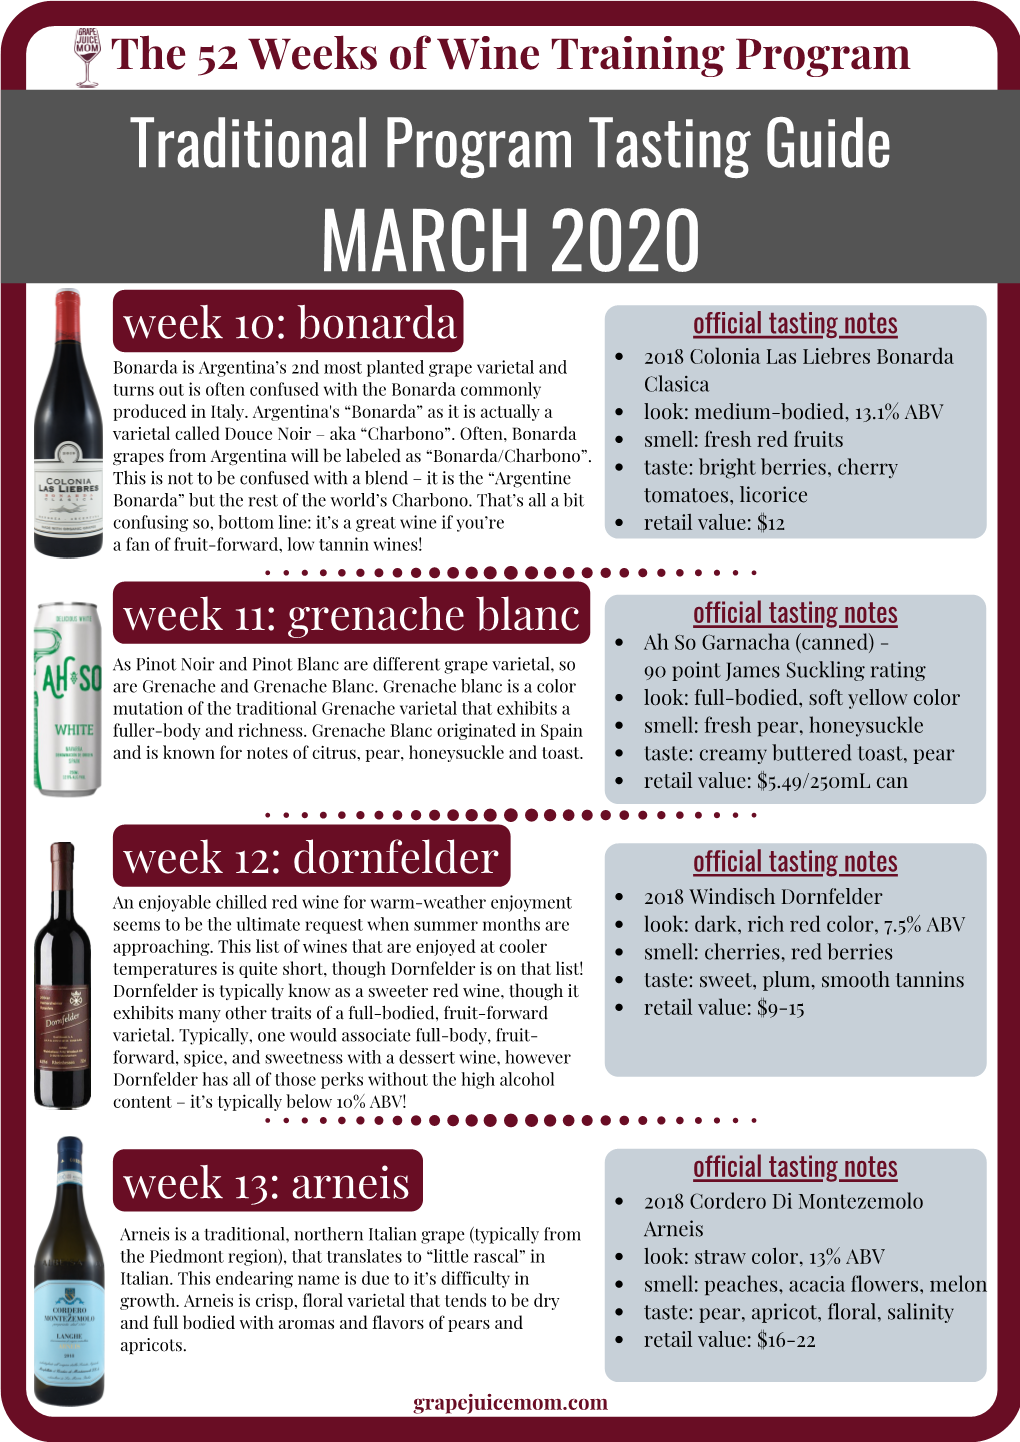 March Traditional Program Tasting Notes